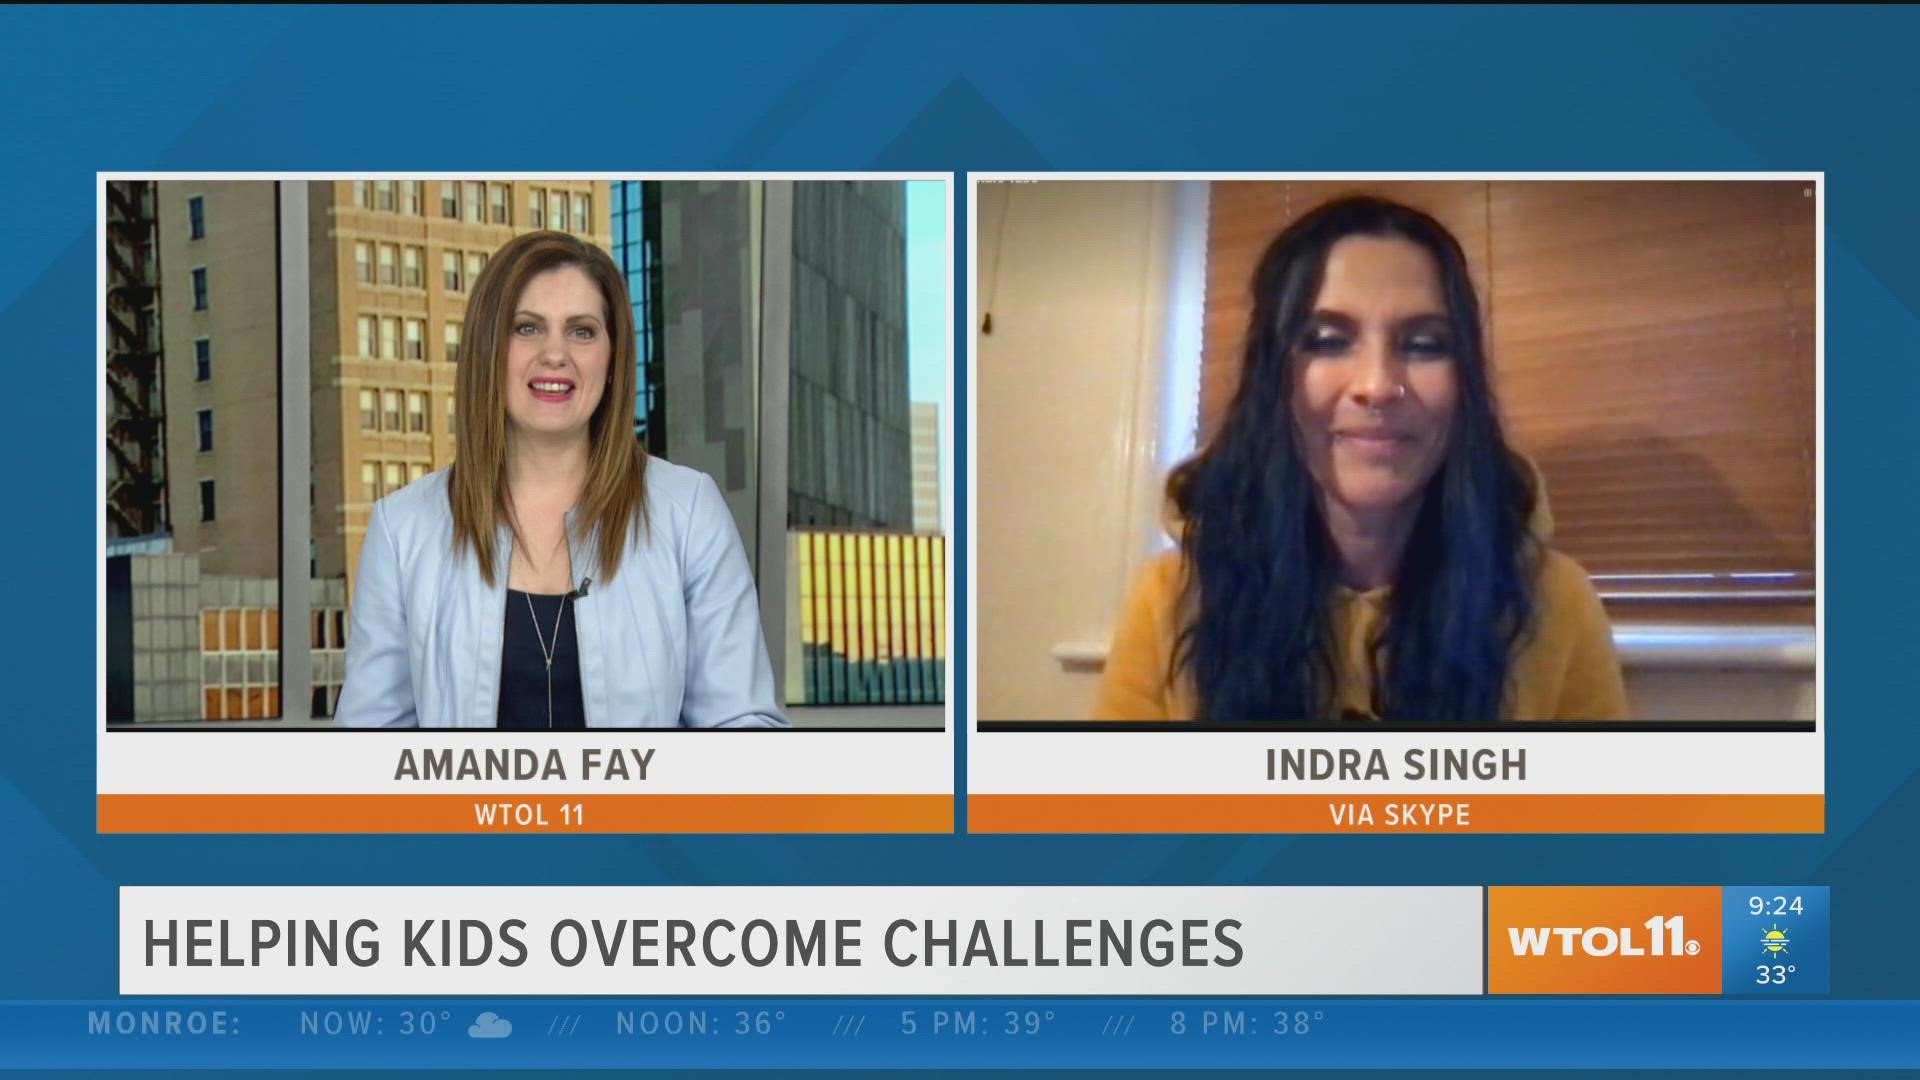 Yoga instructor Indra Singh explains how parents can help kids navigate tough feelings and overcome challenges.